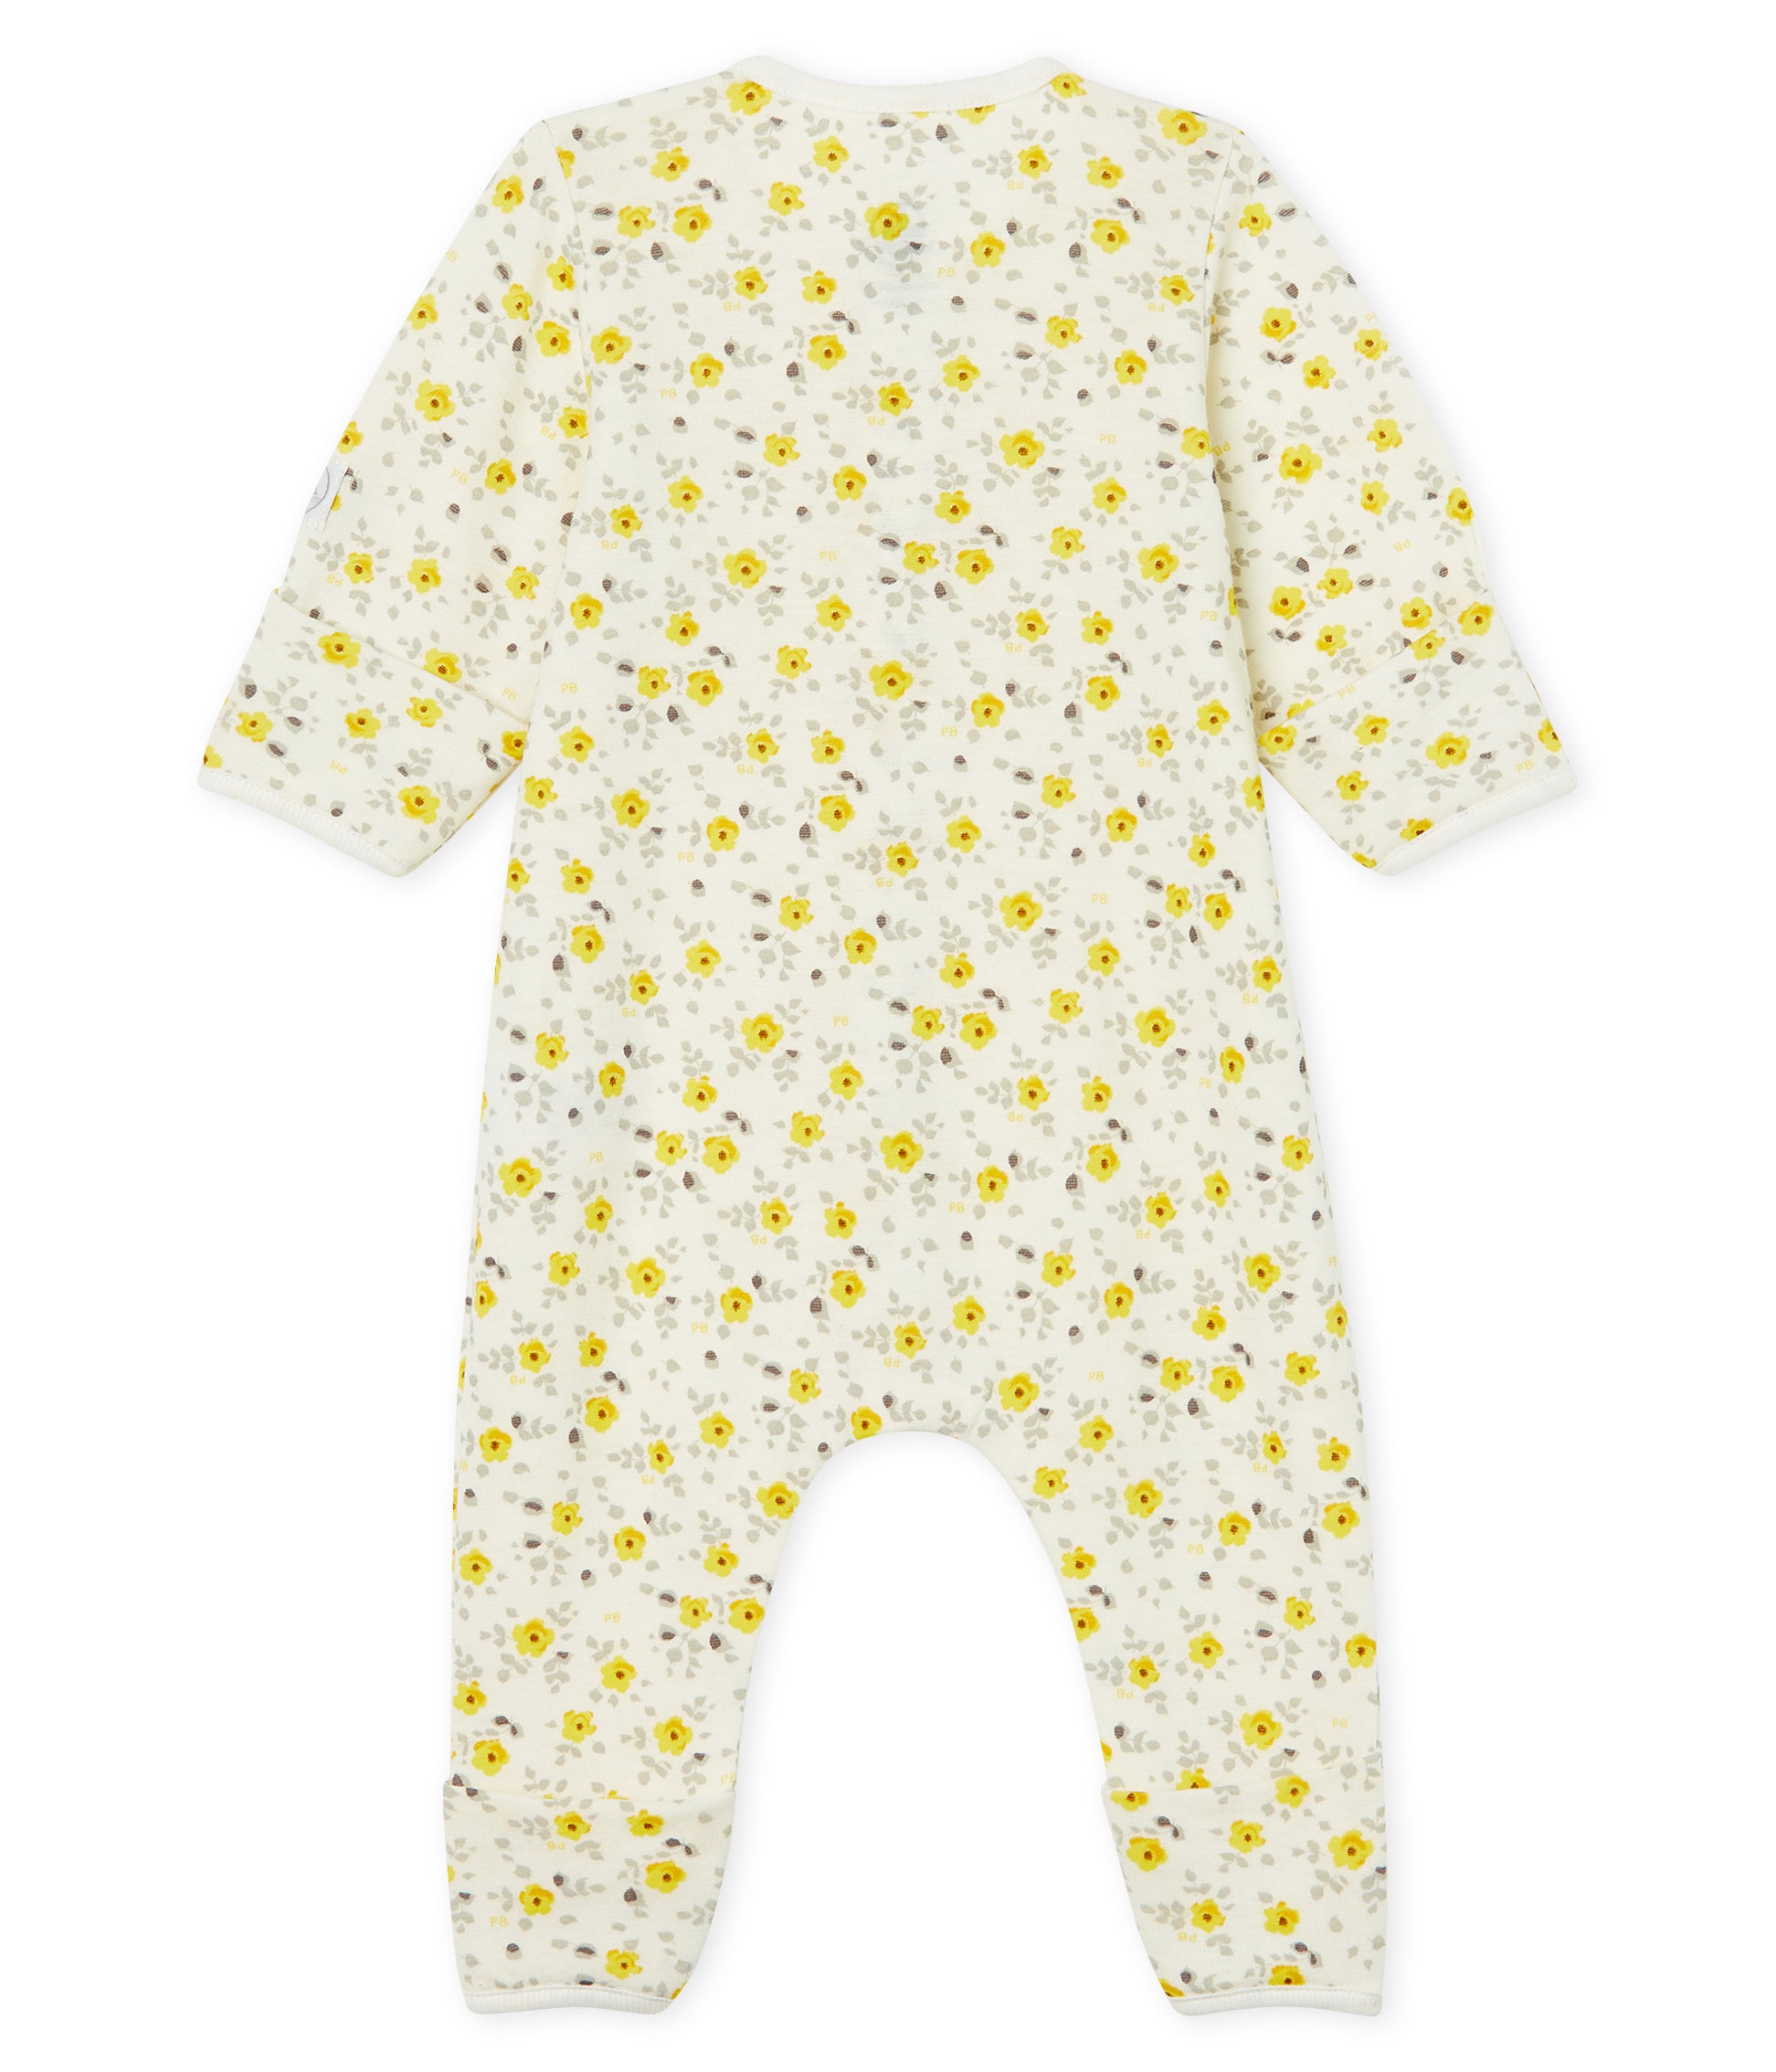 Baby Girls Yellow Floral Cotton Babysuit